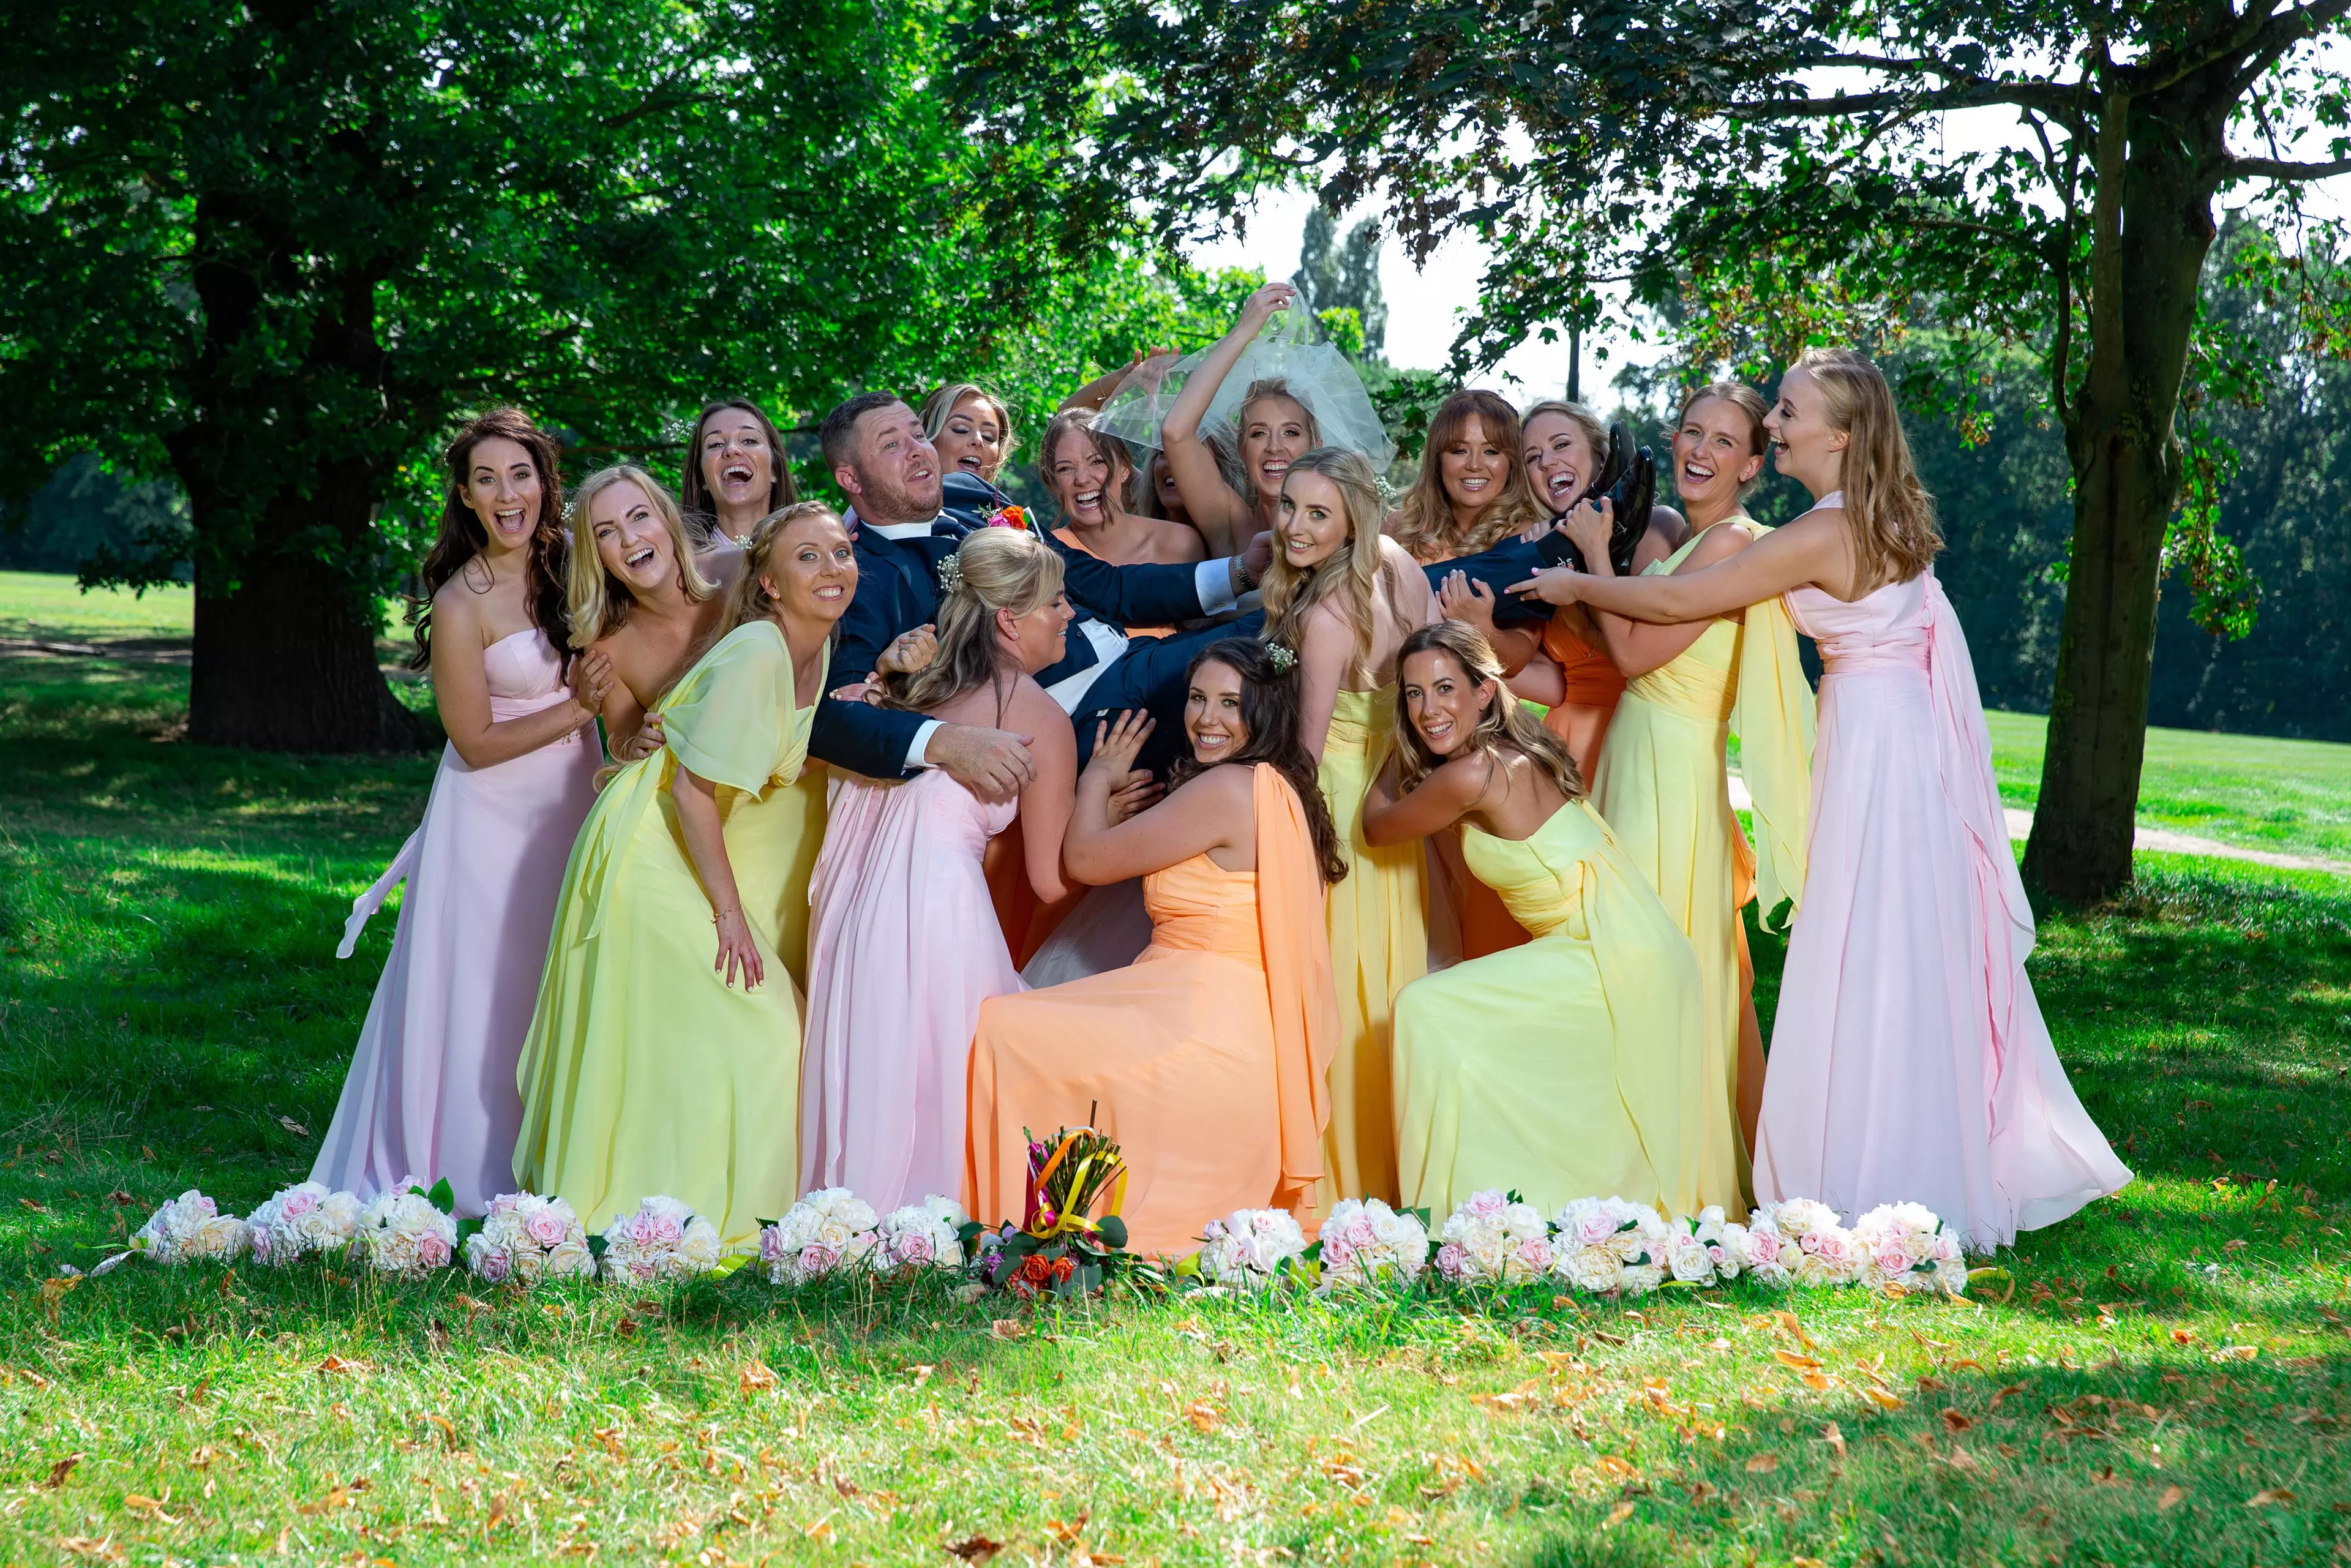 The bridesmaids were thrilled to be part of Chelsie's big day (